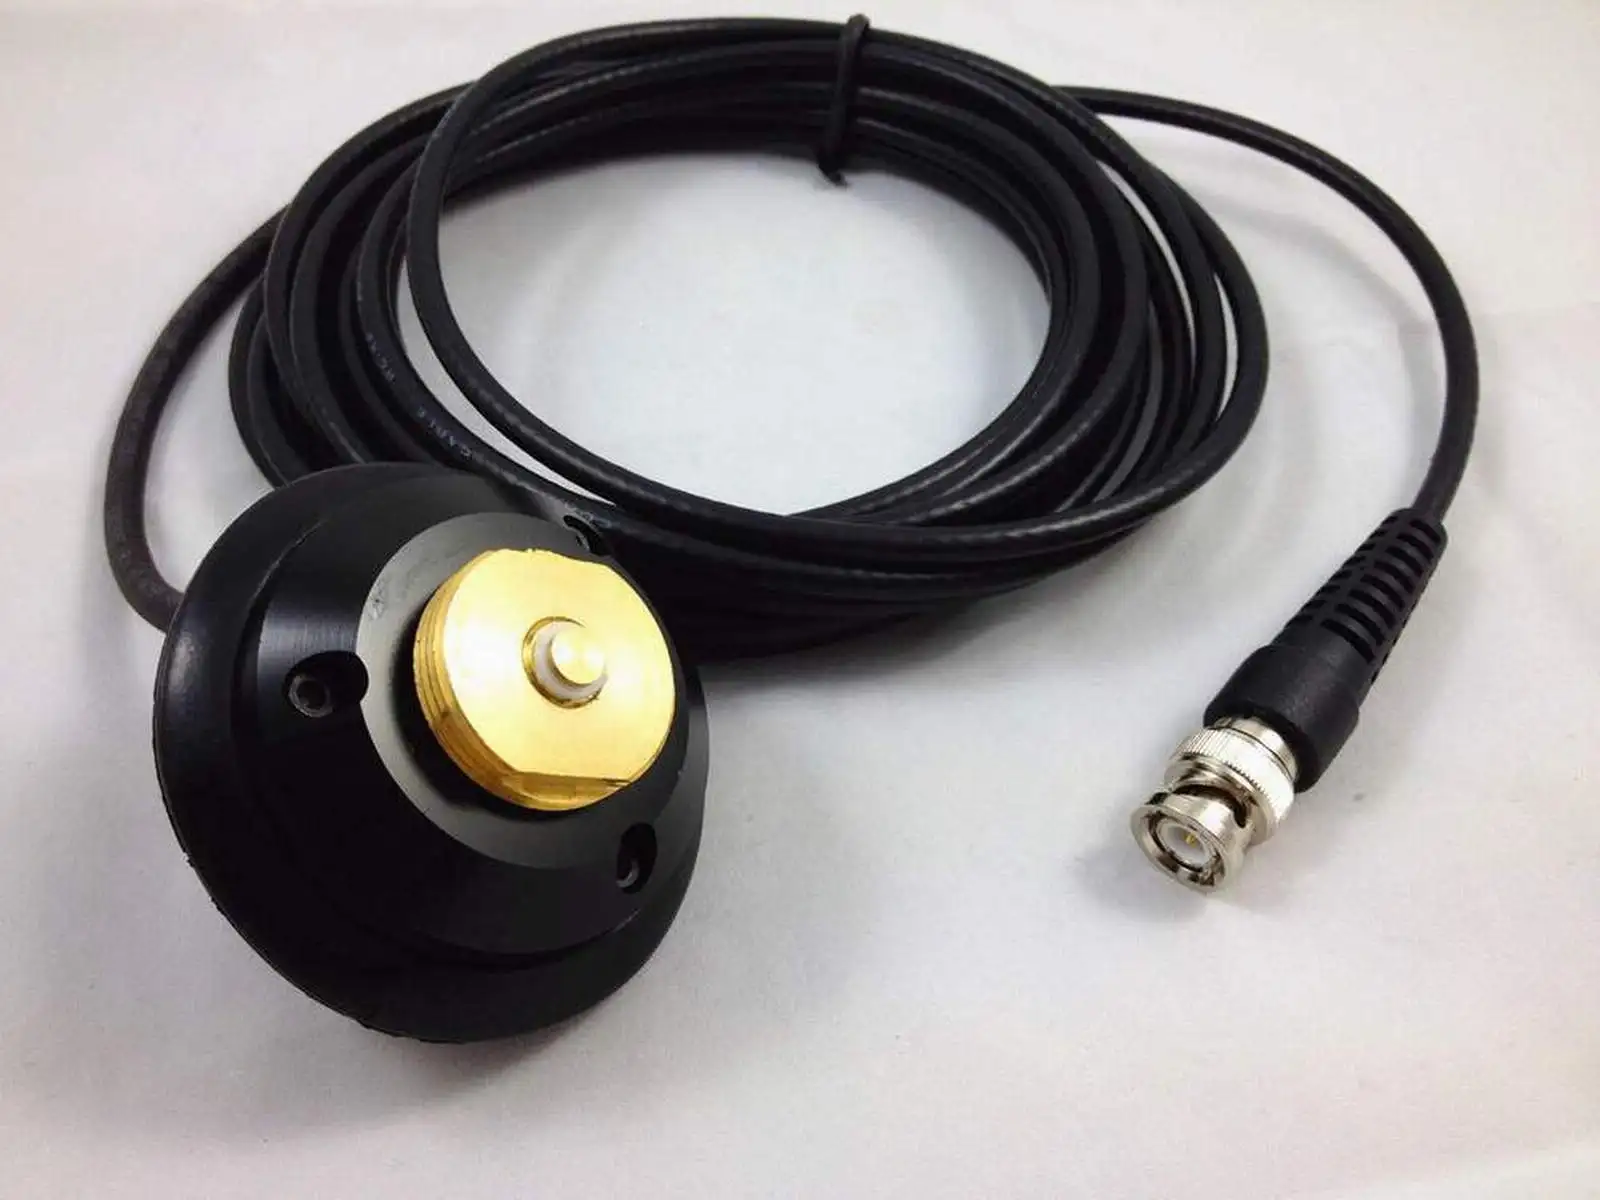 

New 10M Trimble GPS whip Antenna Pole Mount BNC Connector (22720) Cable for GPS